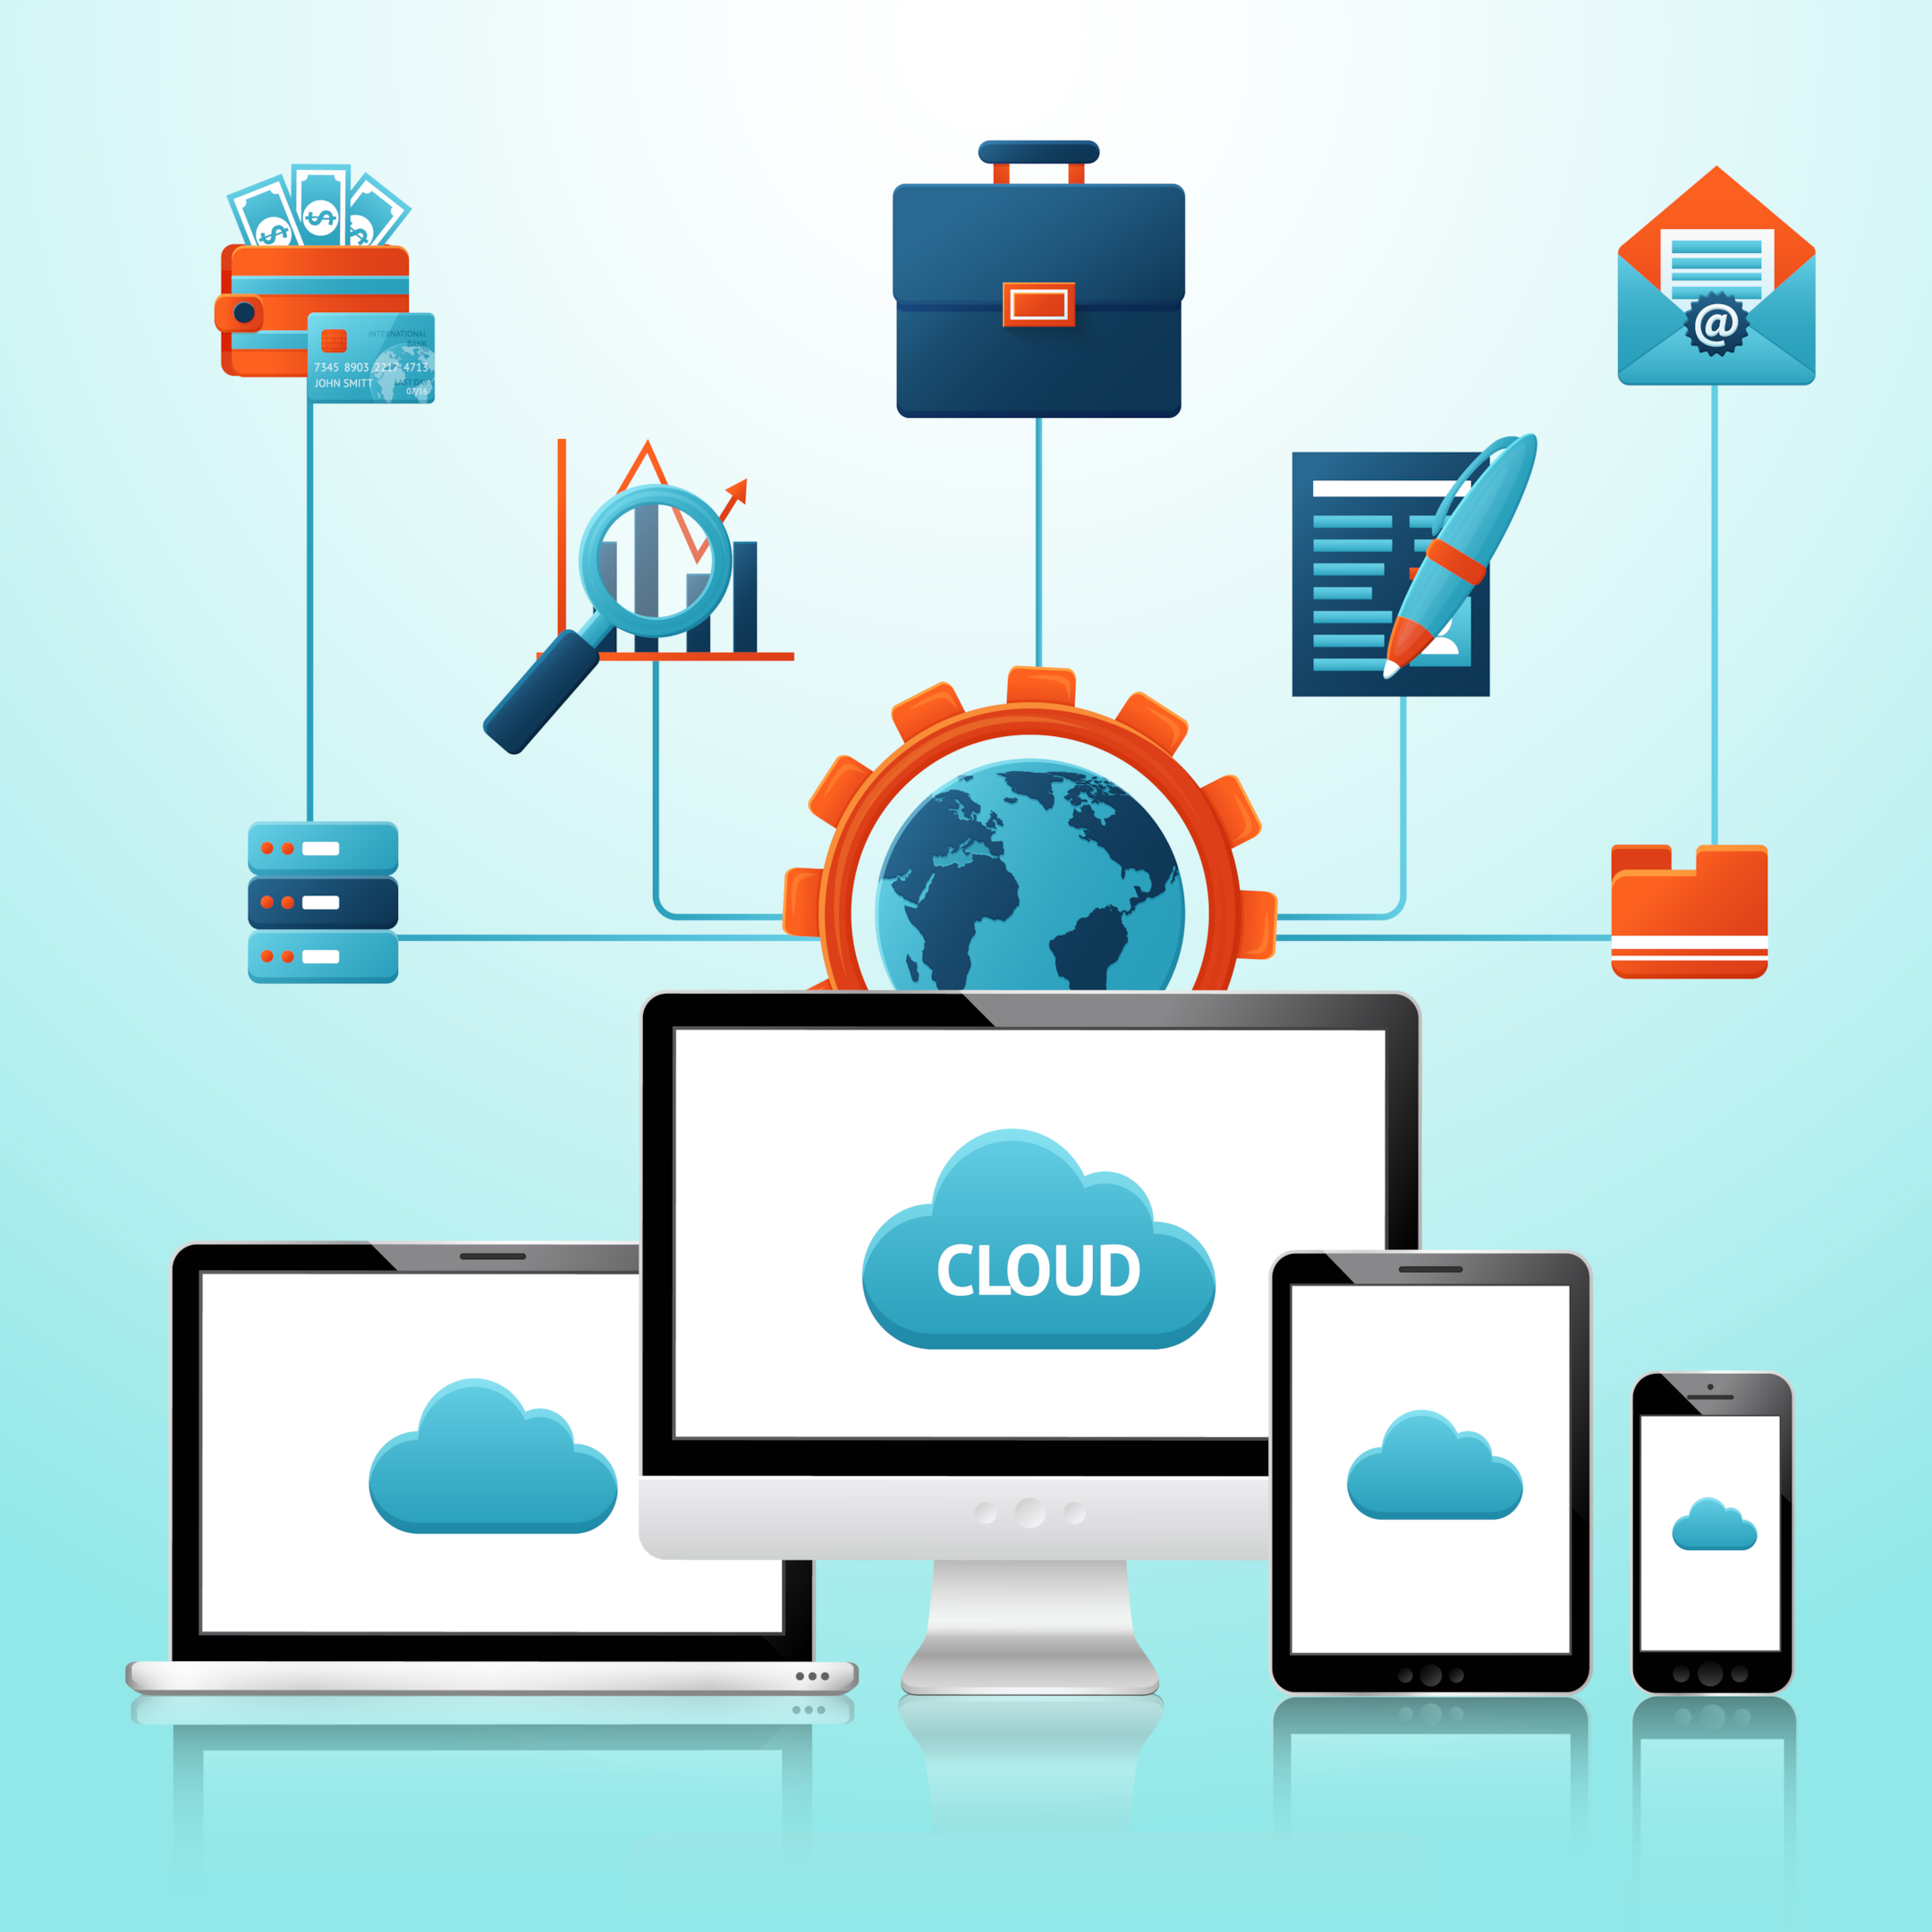 The illustration depicts an abstract conceplt of multi cloud platform